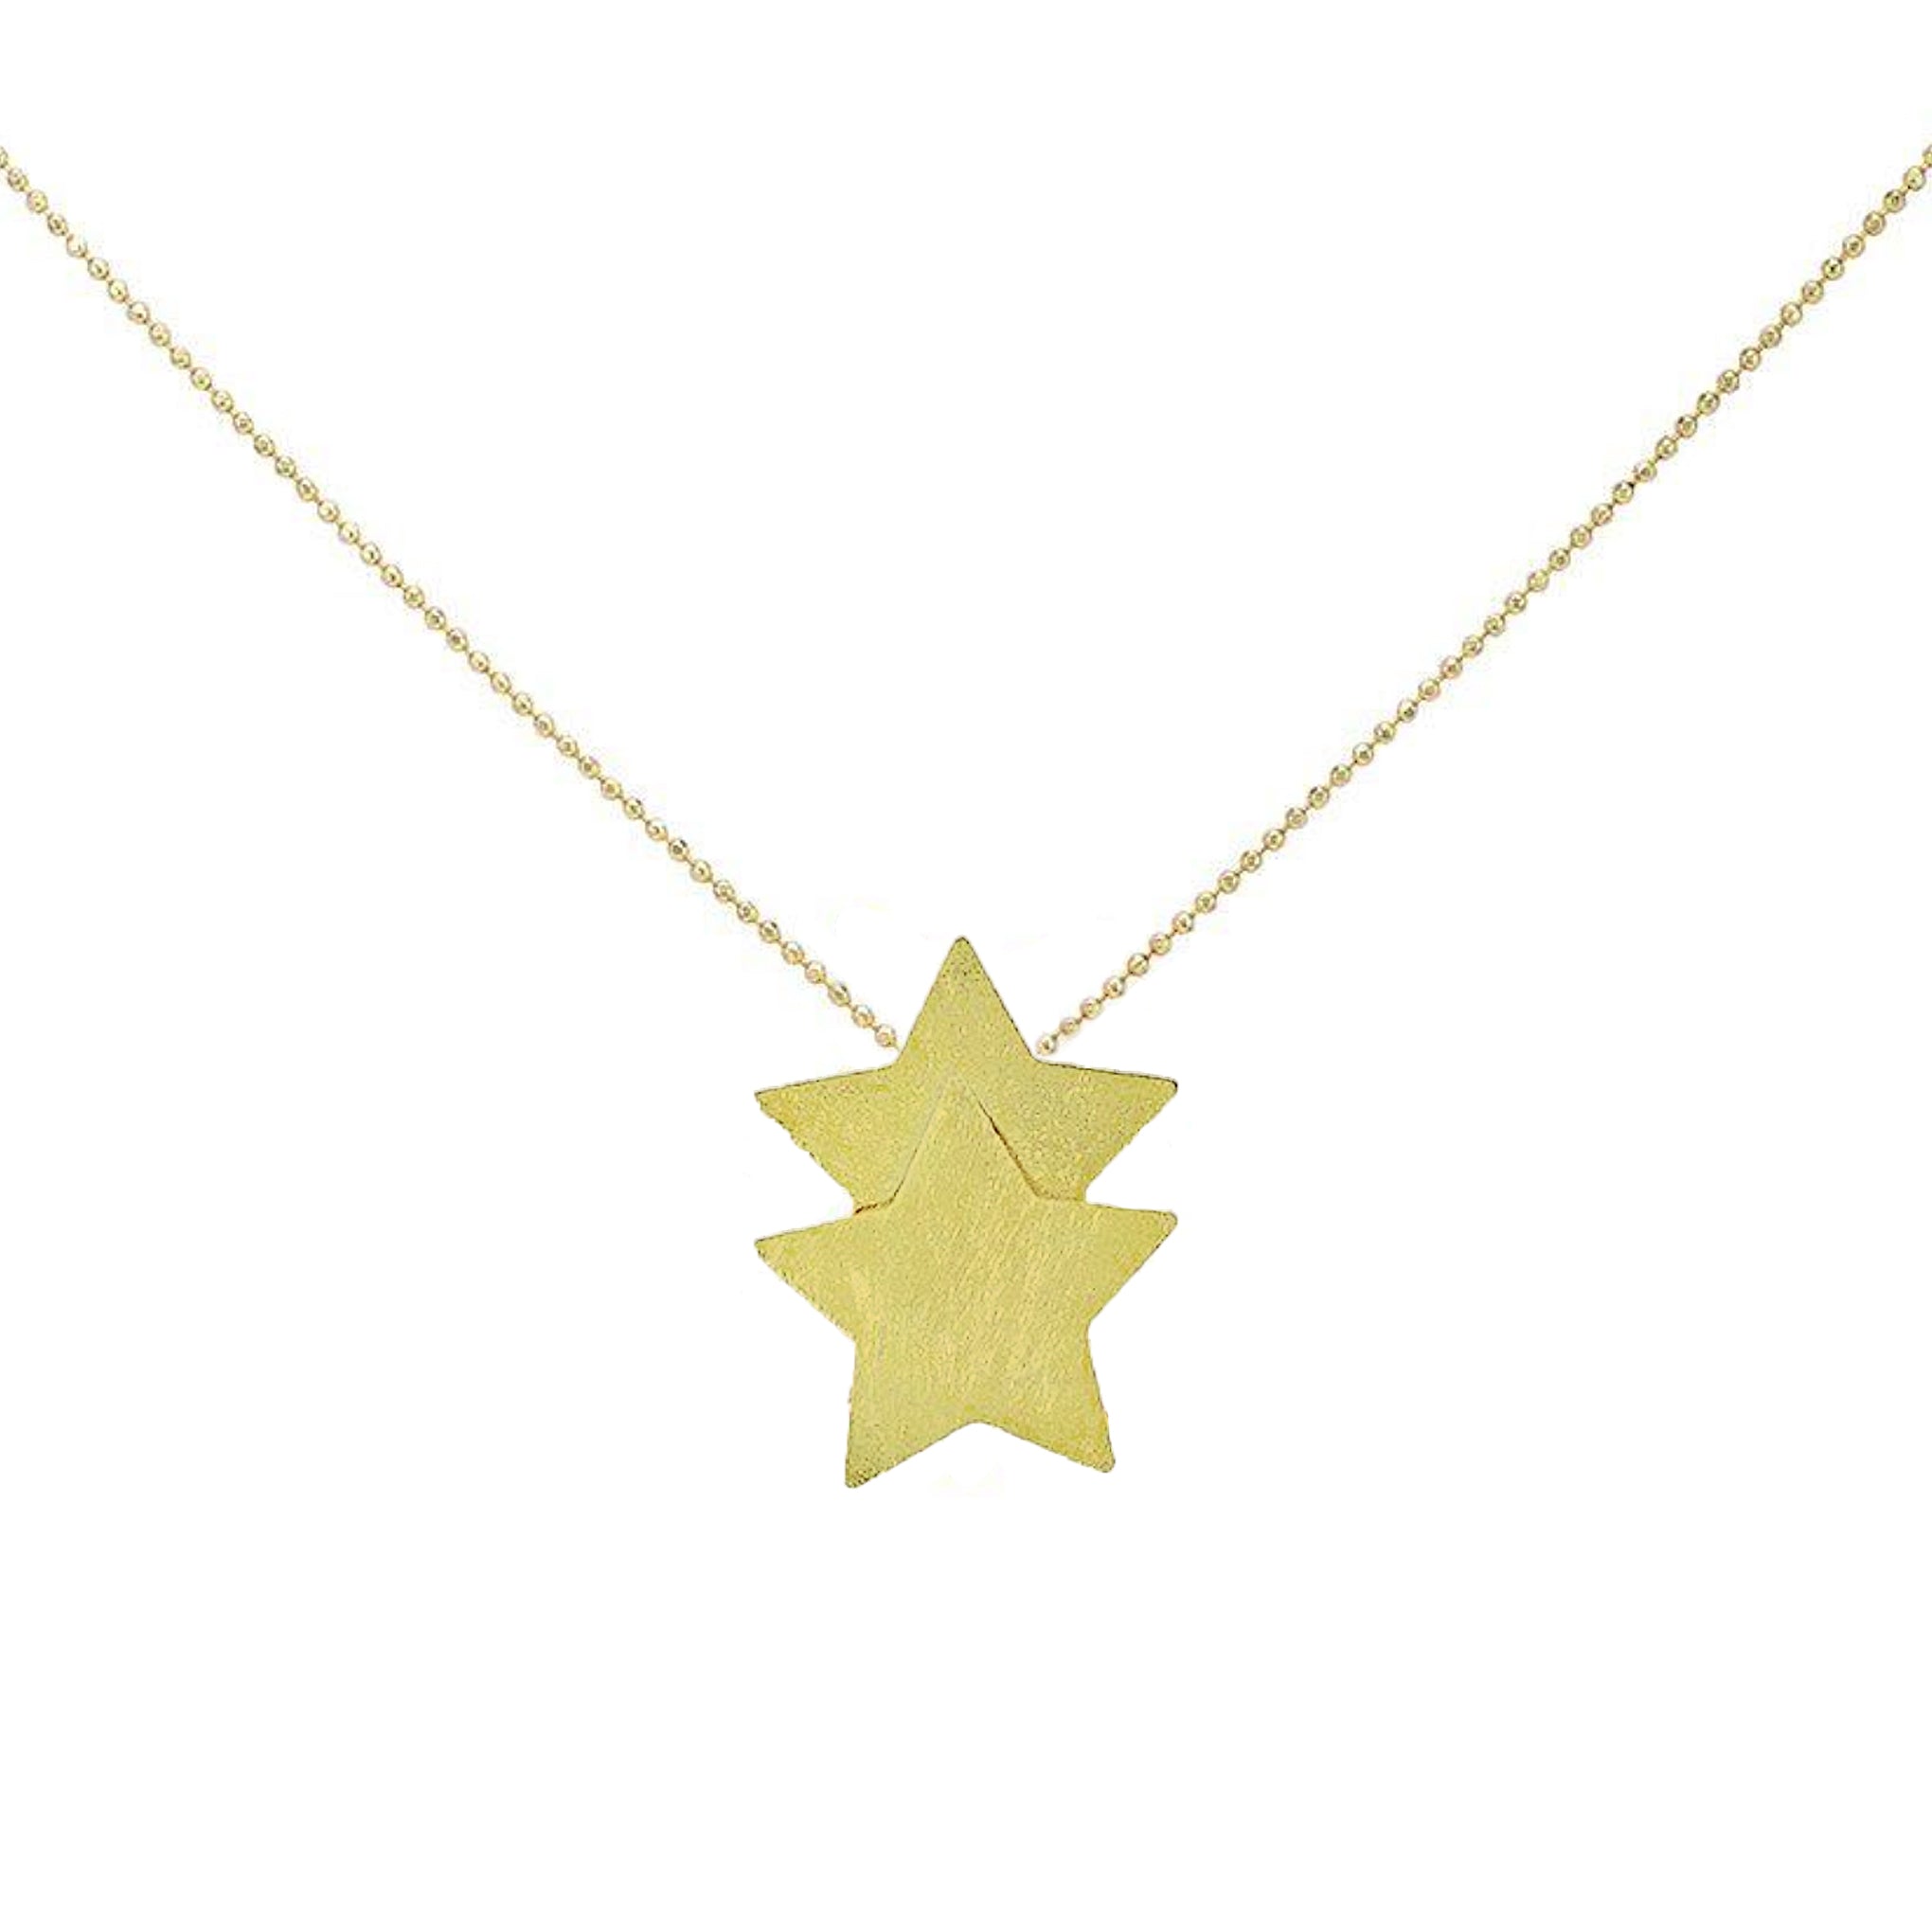 Detail image of Sheila Fajl Castor Double Star Pendant Necklace in Gold Plated